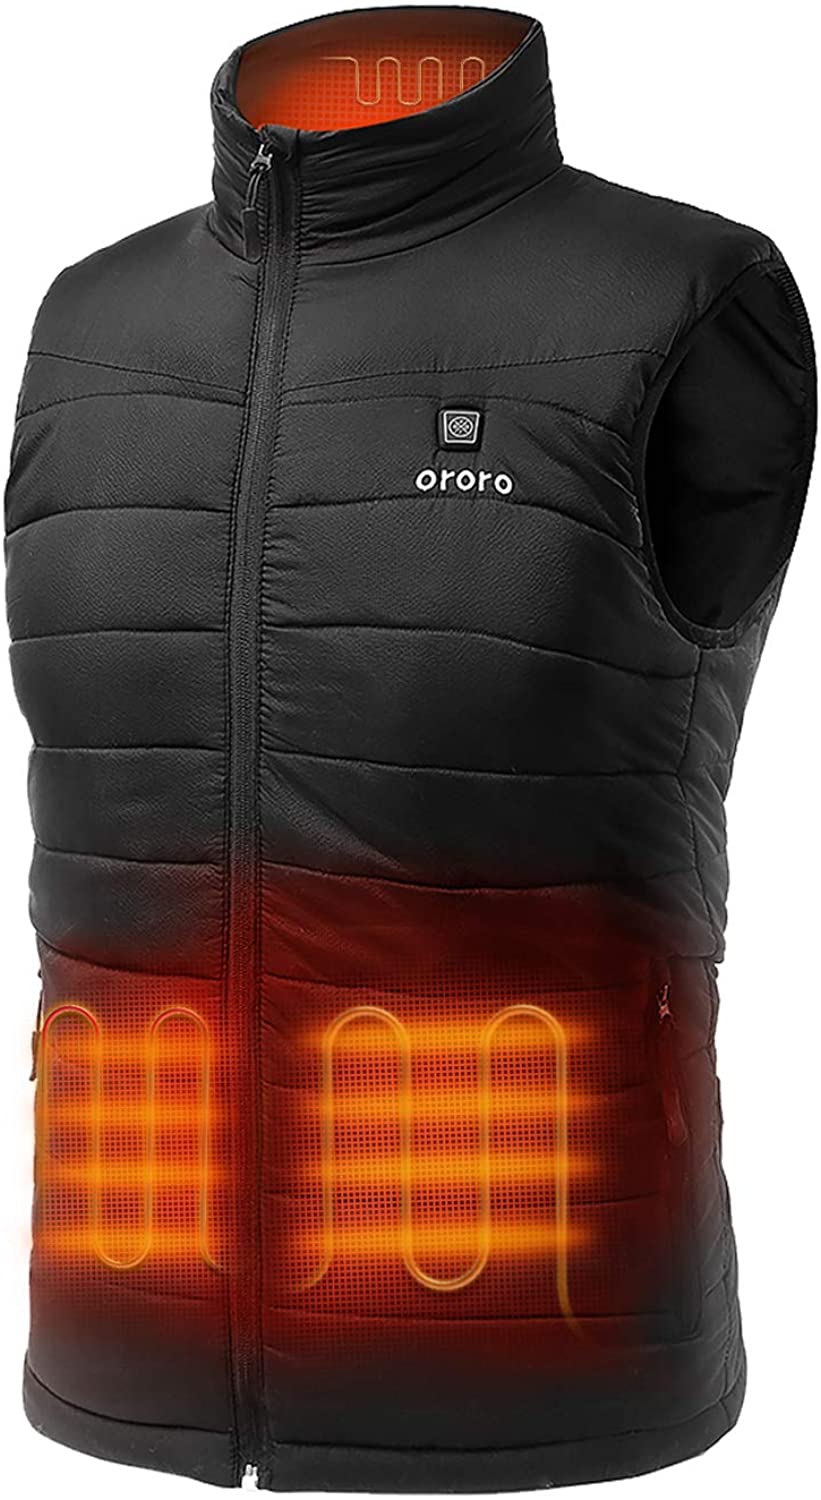 ORORO Mens Heated Vest With Battery Water Resistant Quilted Sleeveless Jacket 